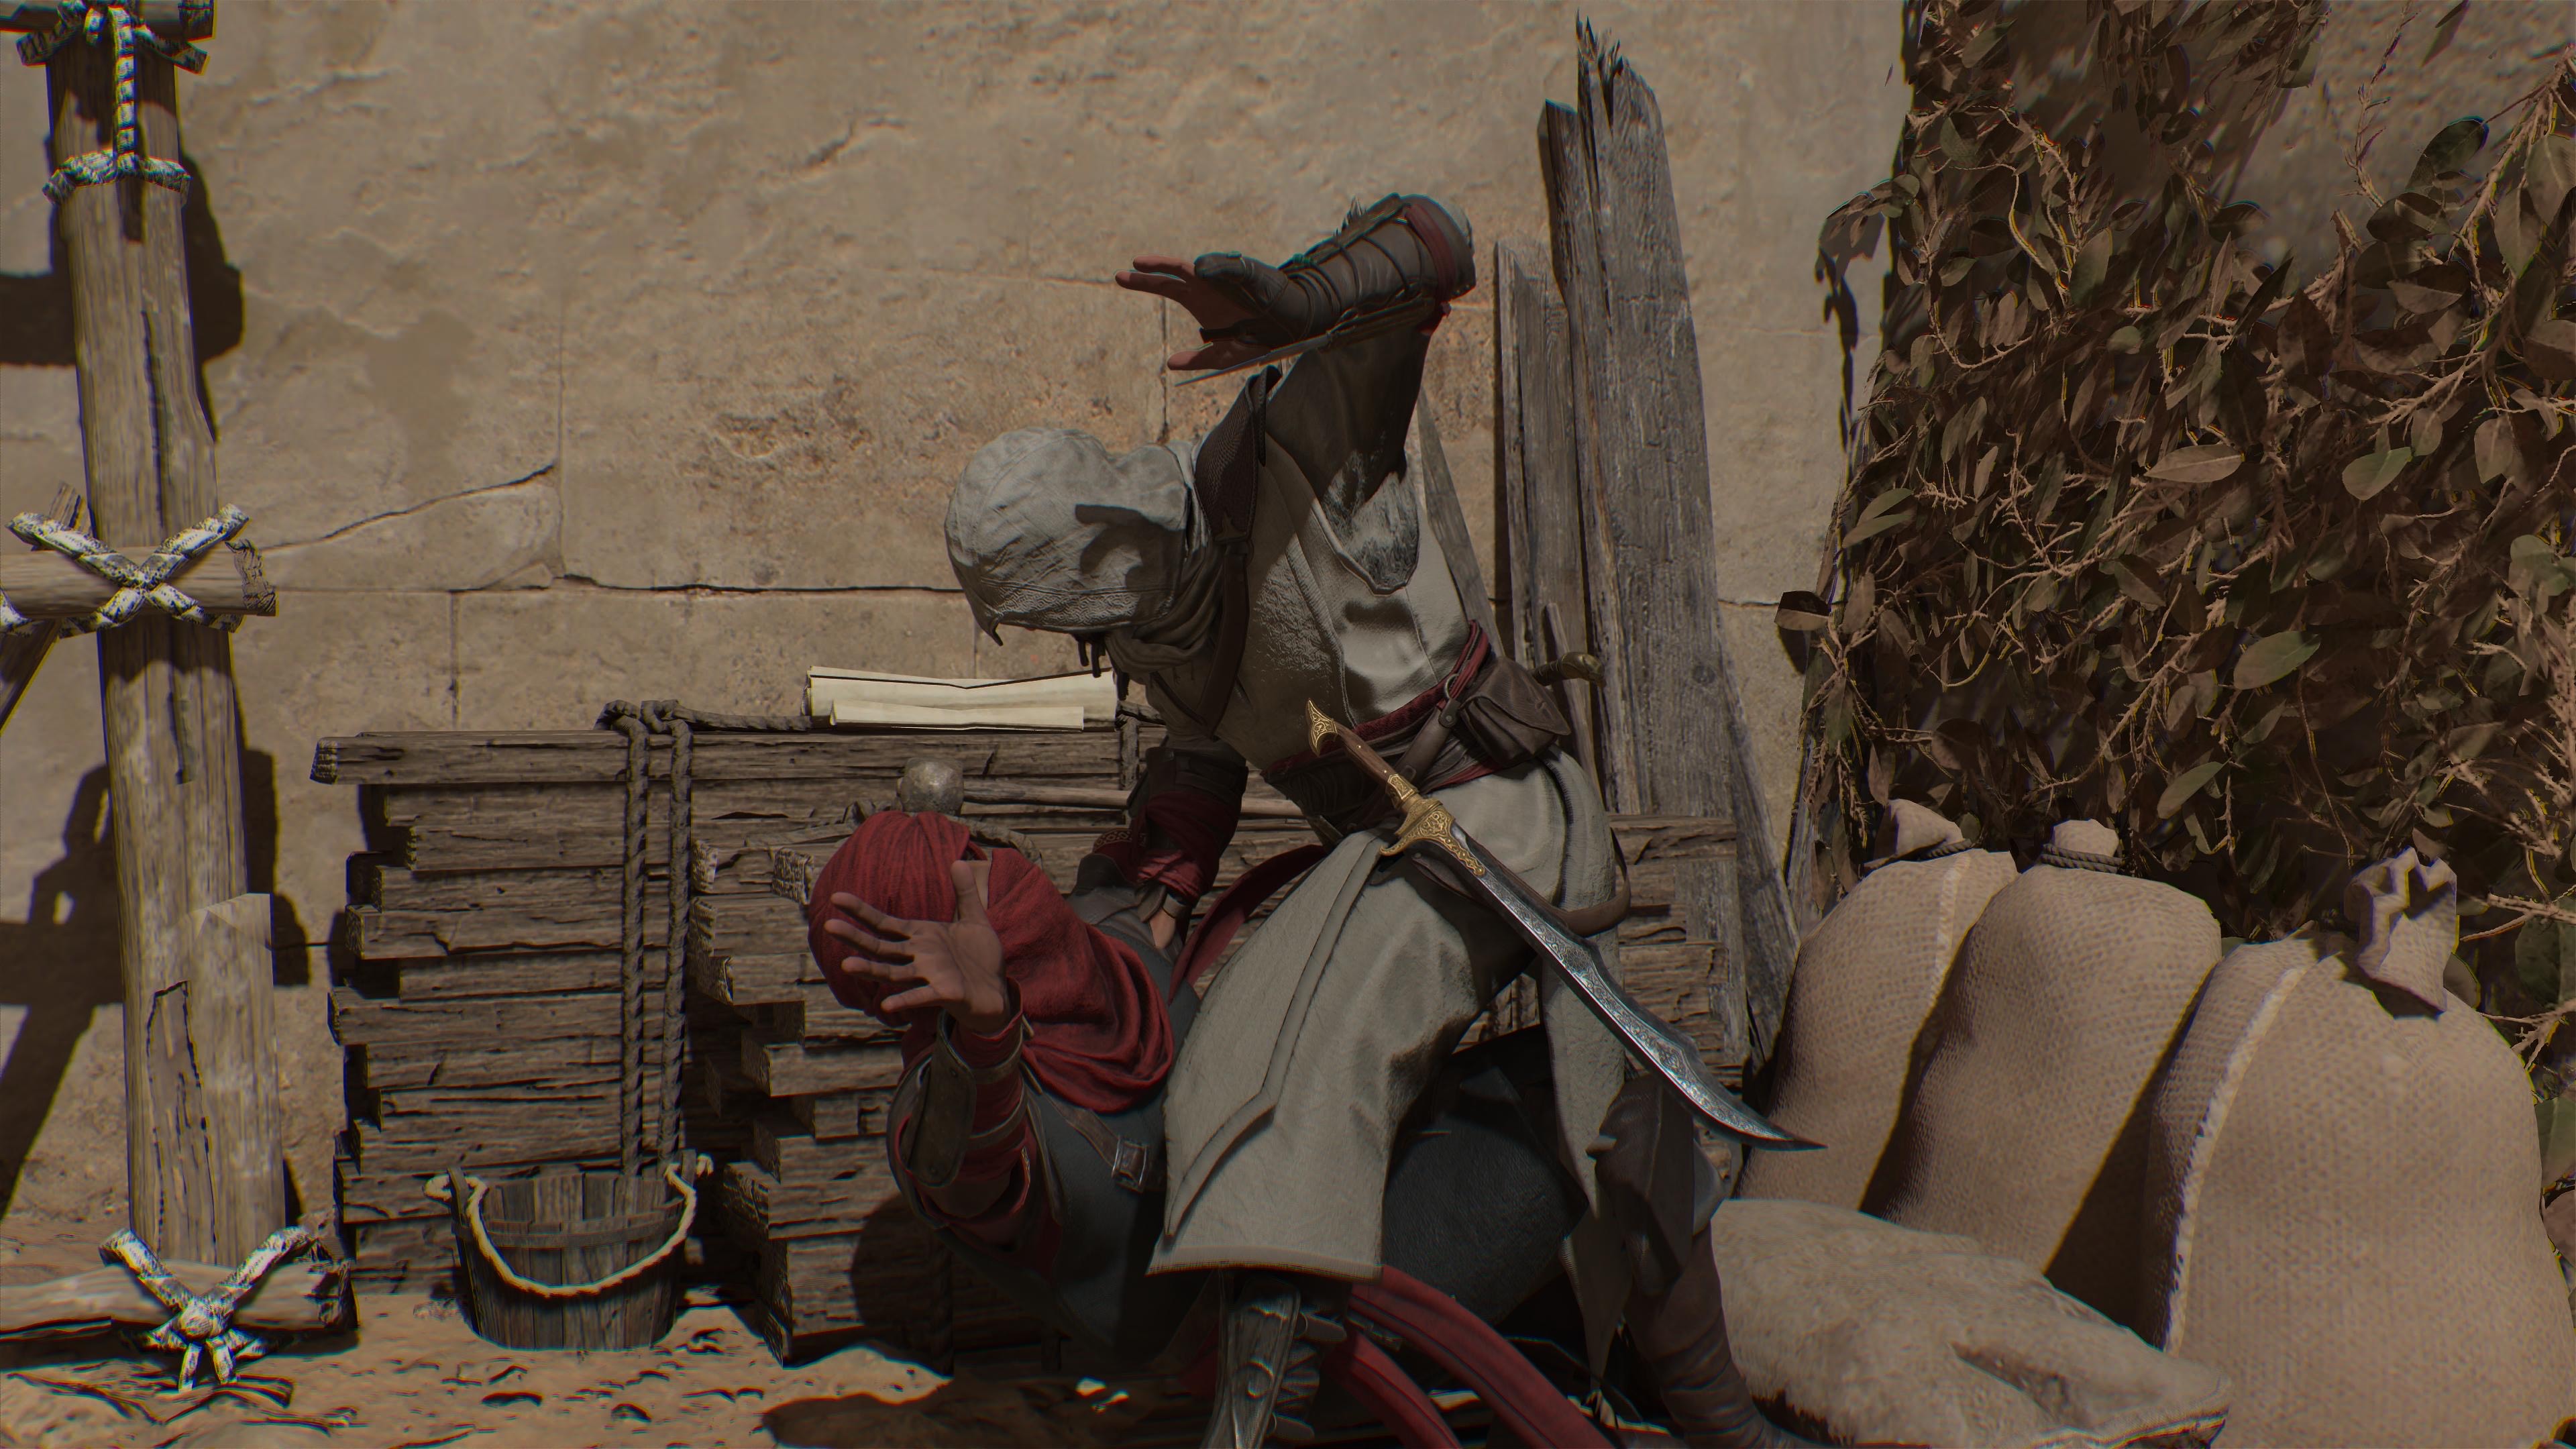 A hooded figure prepares to kill an enemy with a blade protruding from a bracer in Assassin's Creed Mirage.